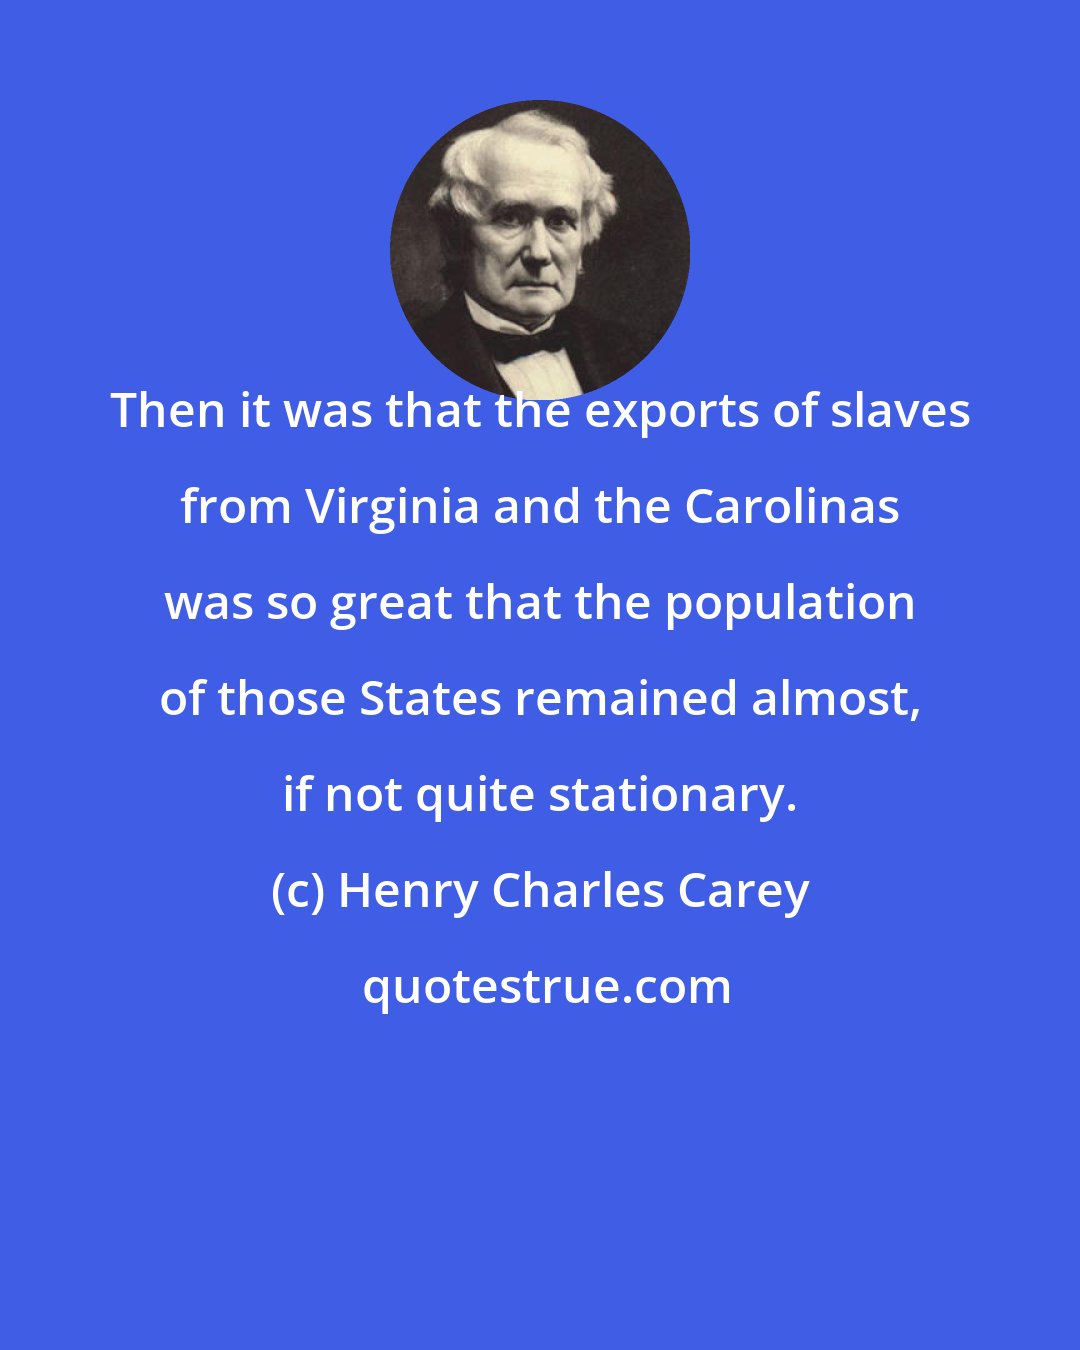 Henry Charles Carey: Then it was that the exports of slaves from Virginia and the Carolinas was so great that the population of those States remained almost, if not quite stationary.